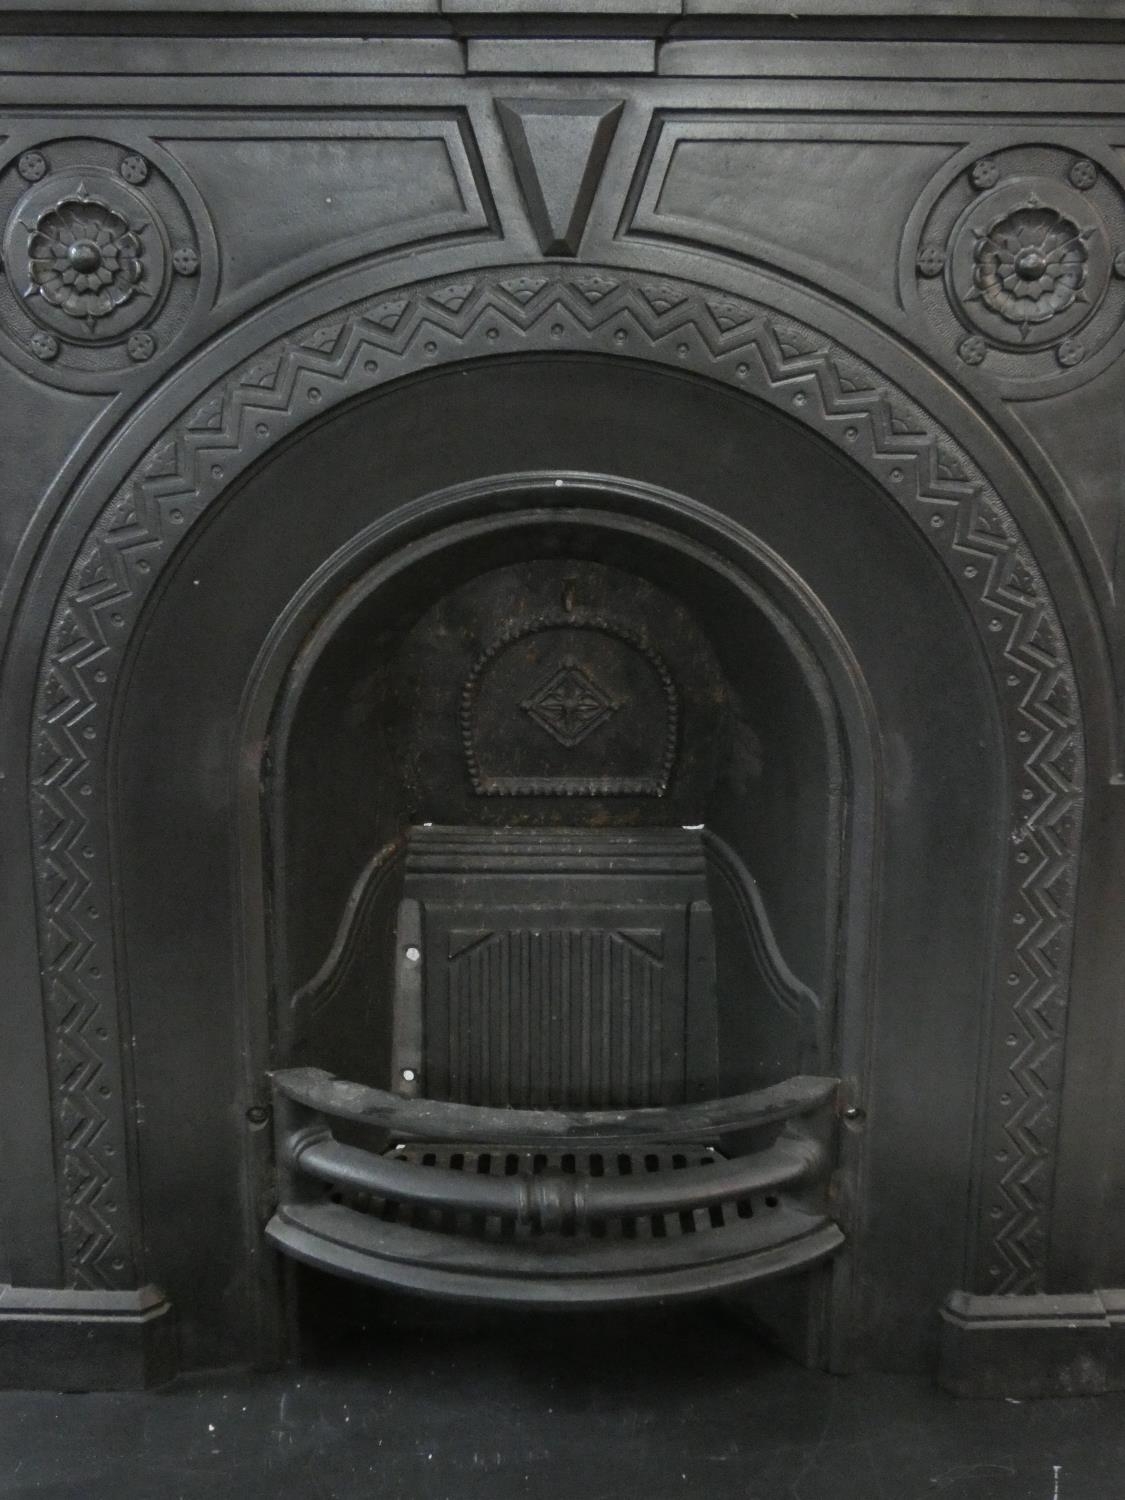 An ornately cast 19th century iron fire surround, mantel shelf and insert with grate on marble - Image 6 of 13